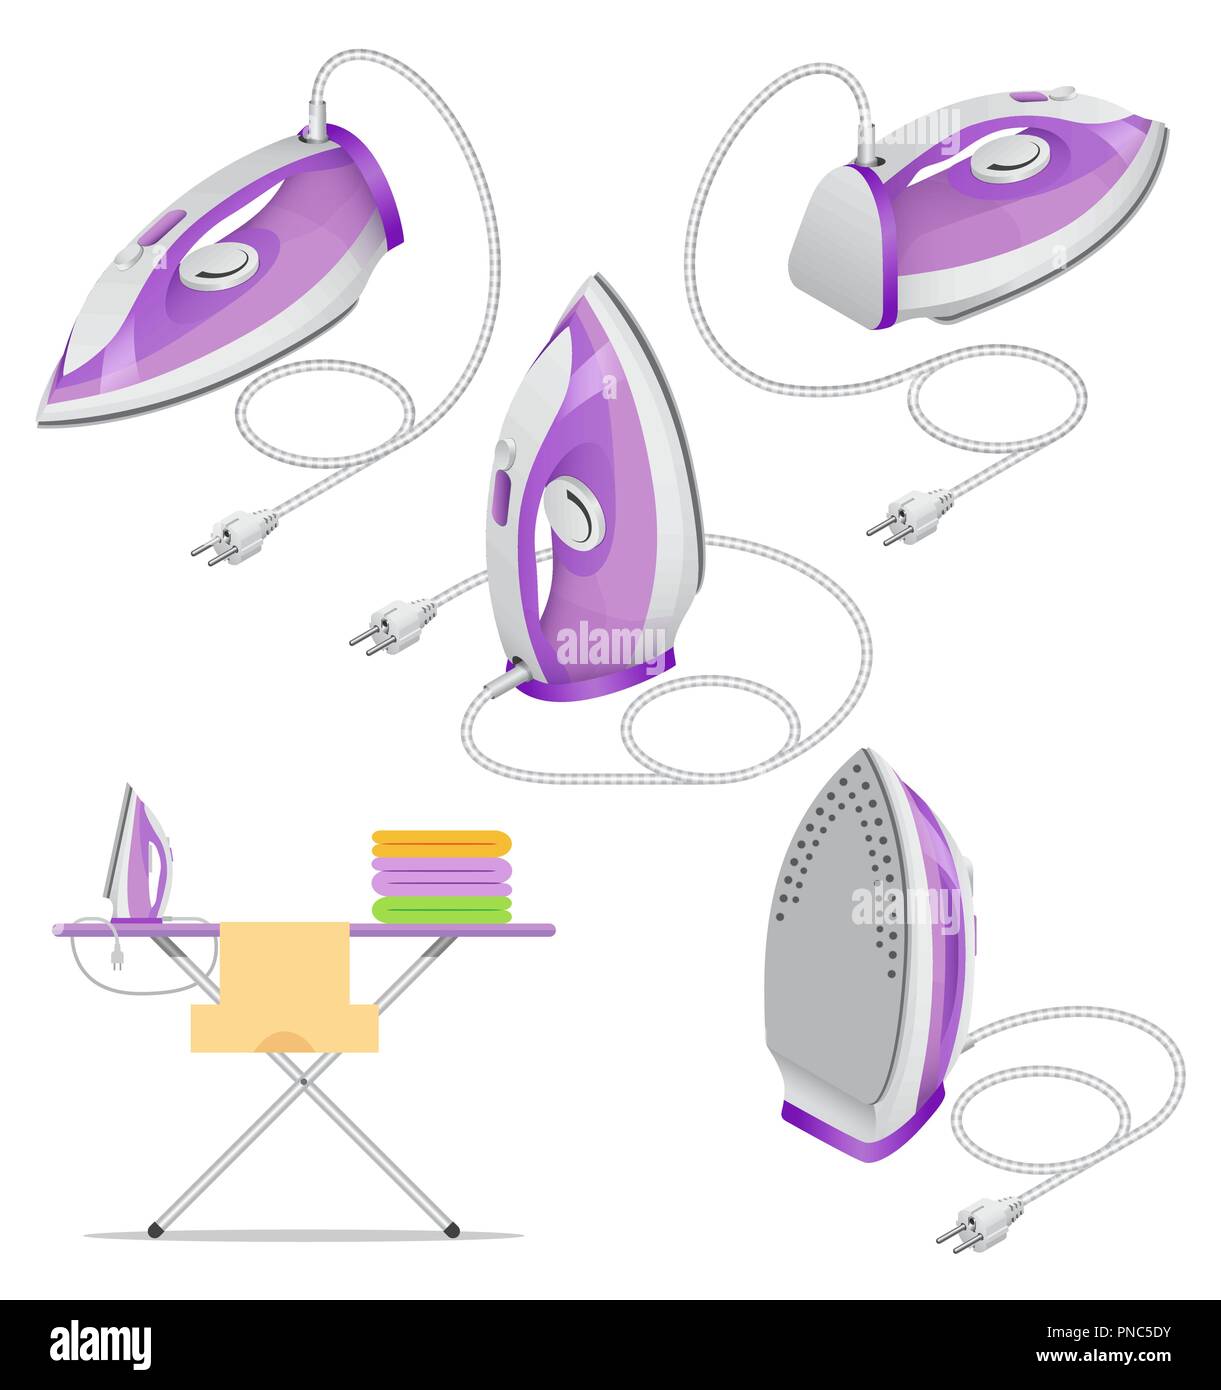 Isometric set of steam iron isolated on white background. Stock Vector